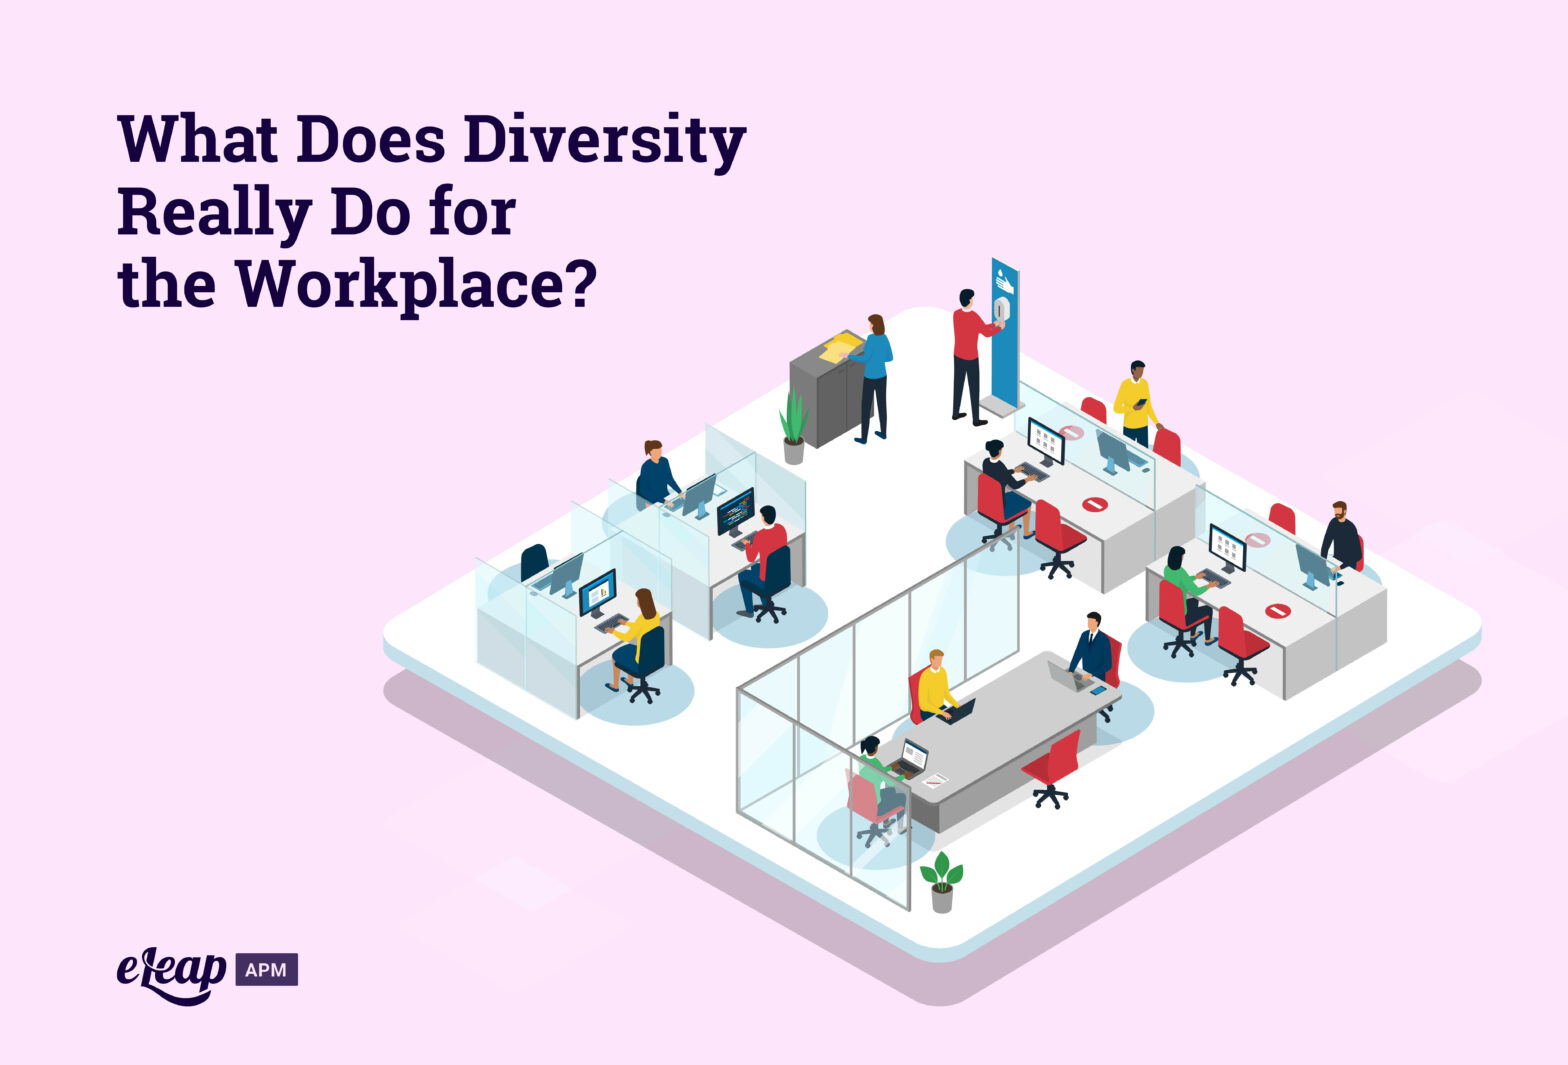 What Does Diversity Really Do for the Workplace?